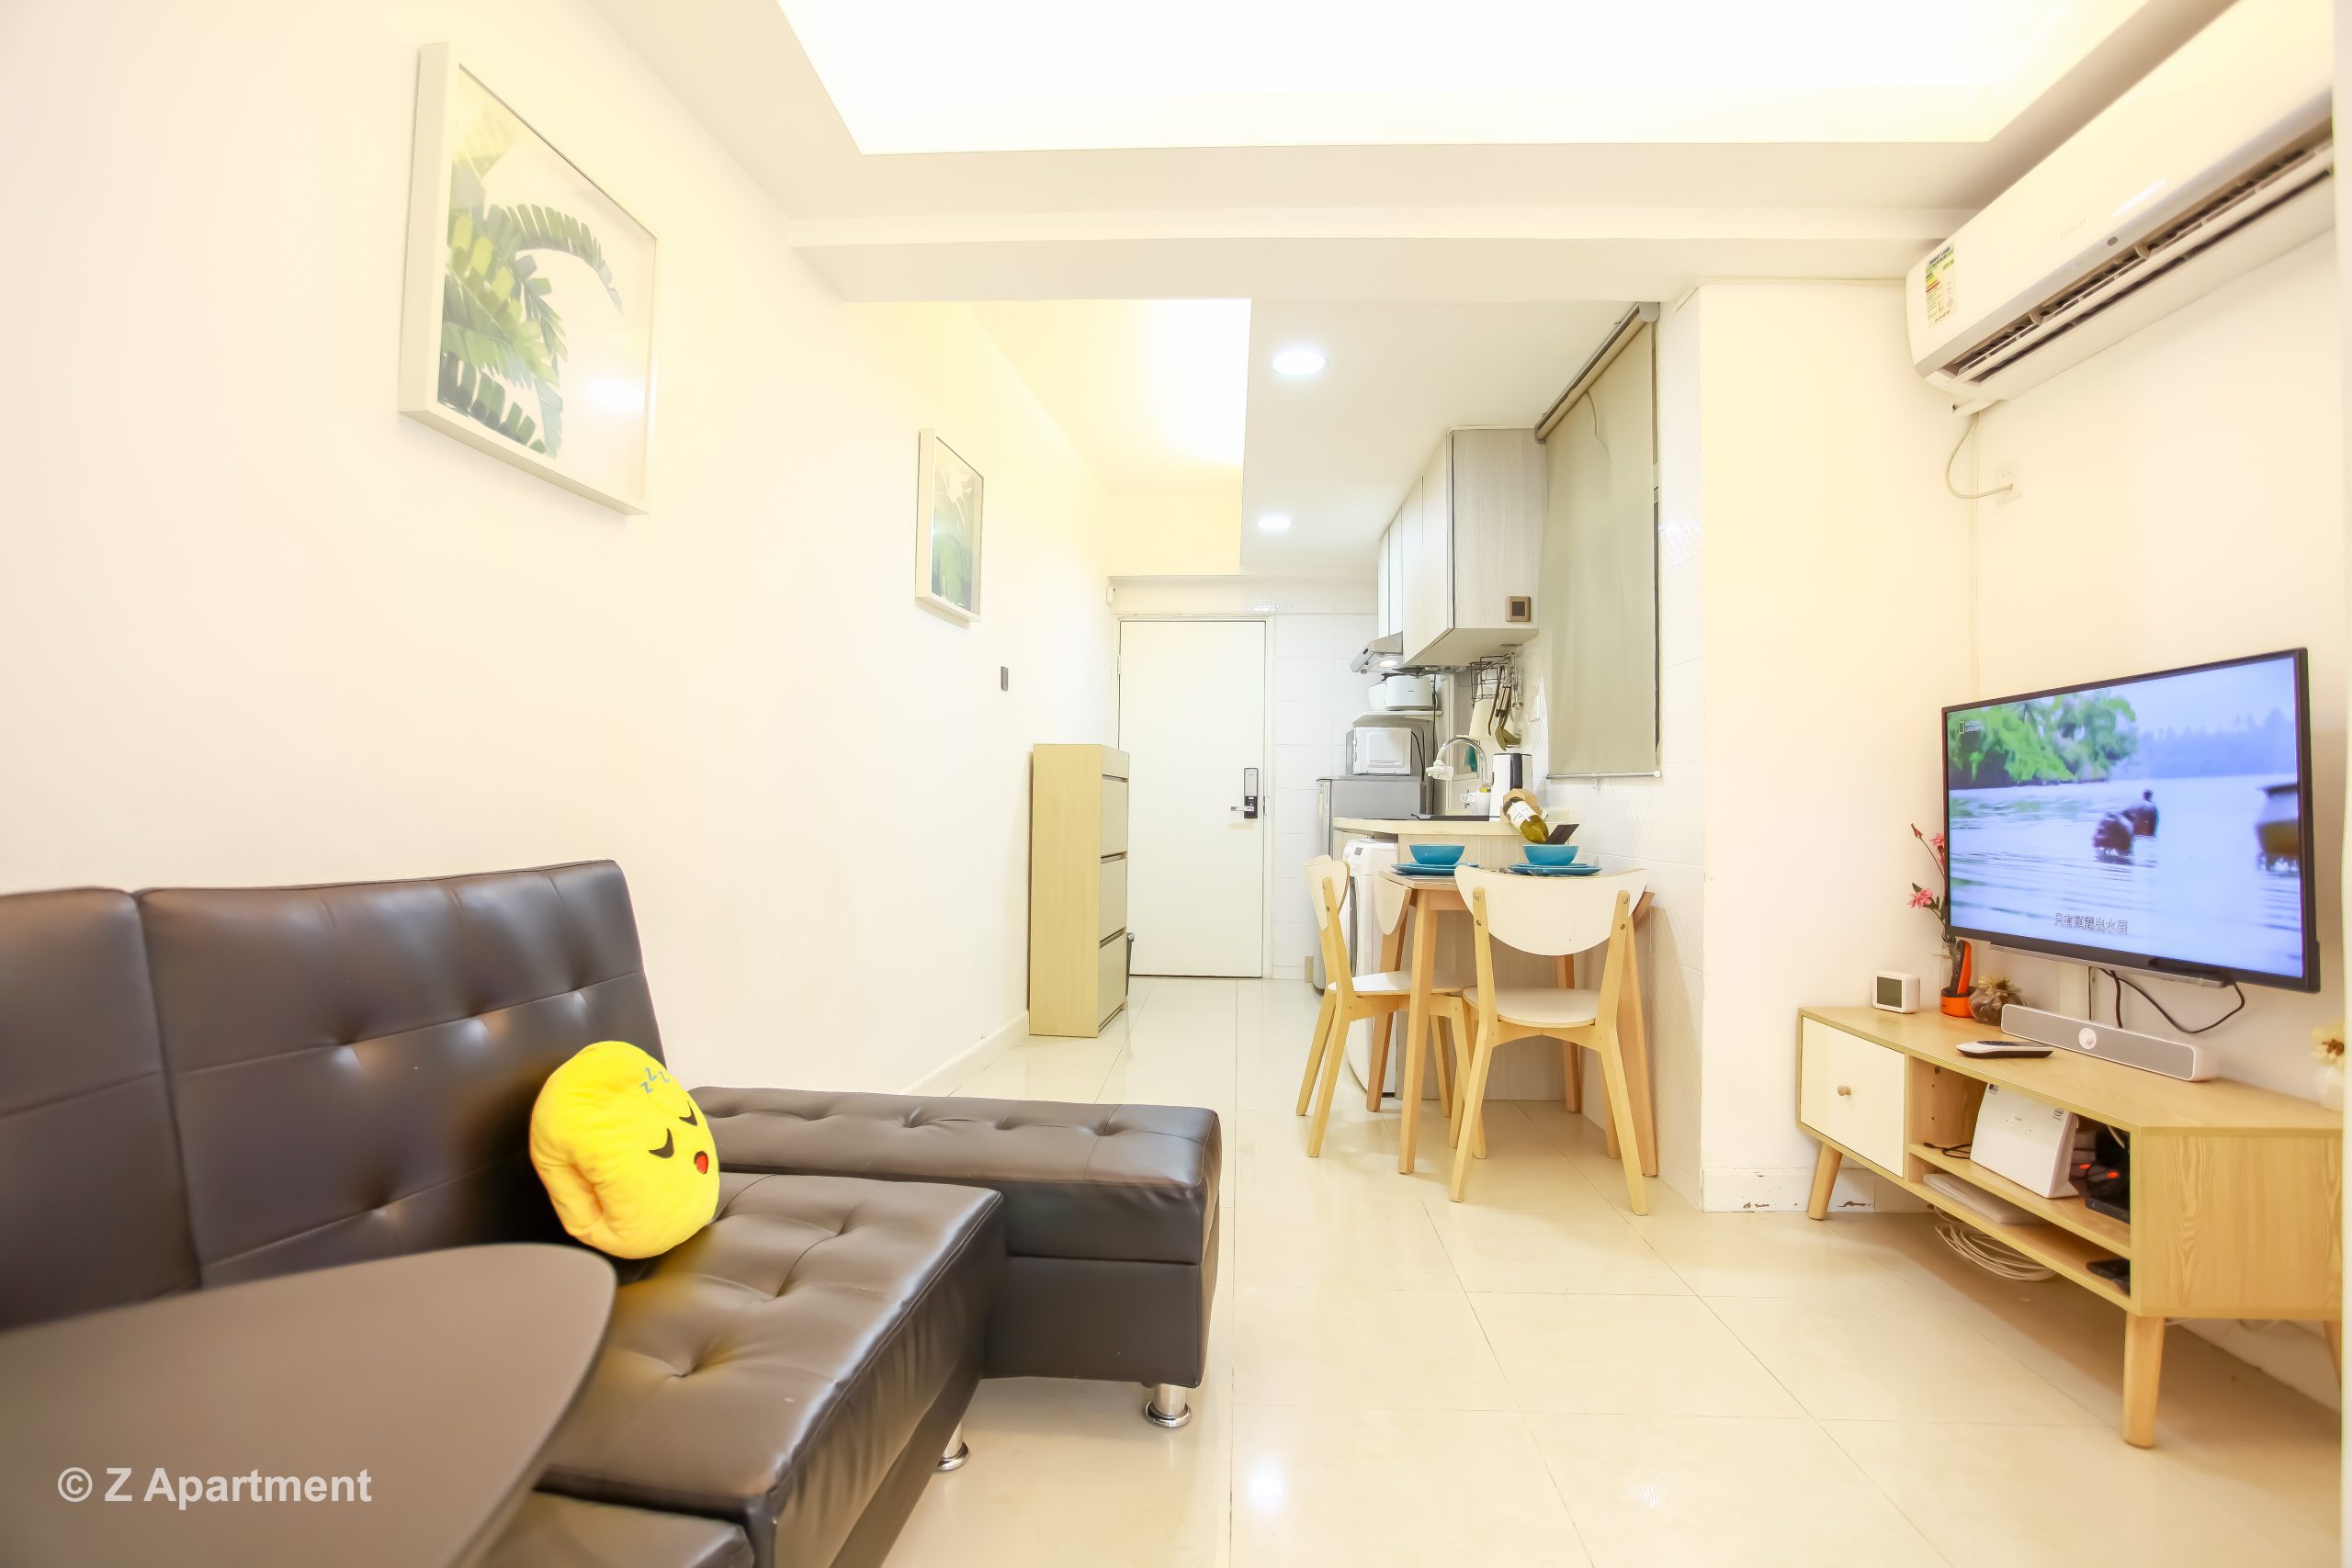 2 bedrooms Hong Kong serviced apartment in quarry bay with sofa bed, tv, dining table